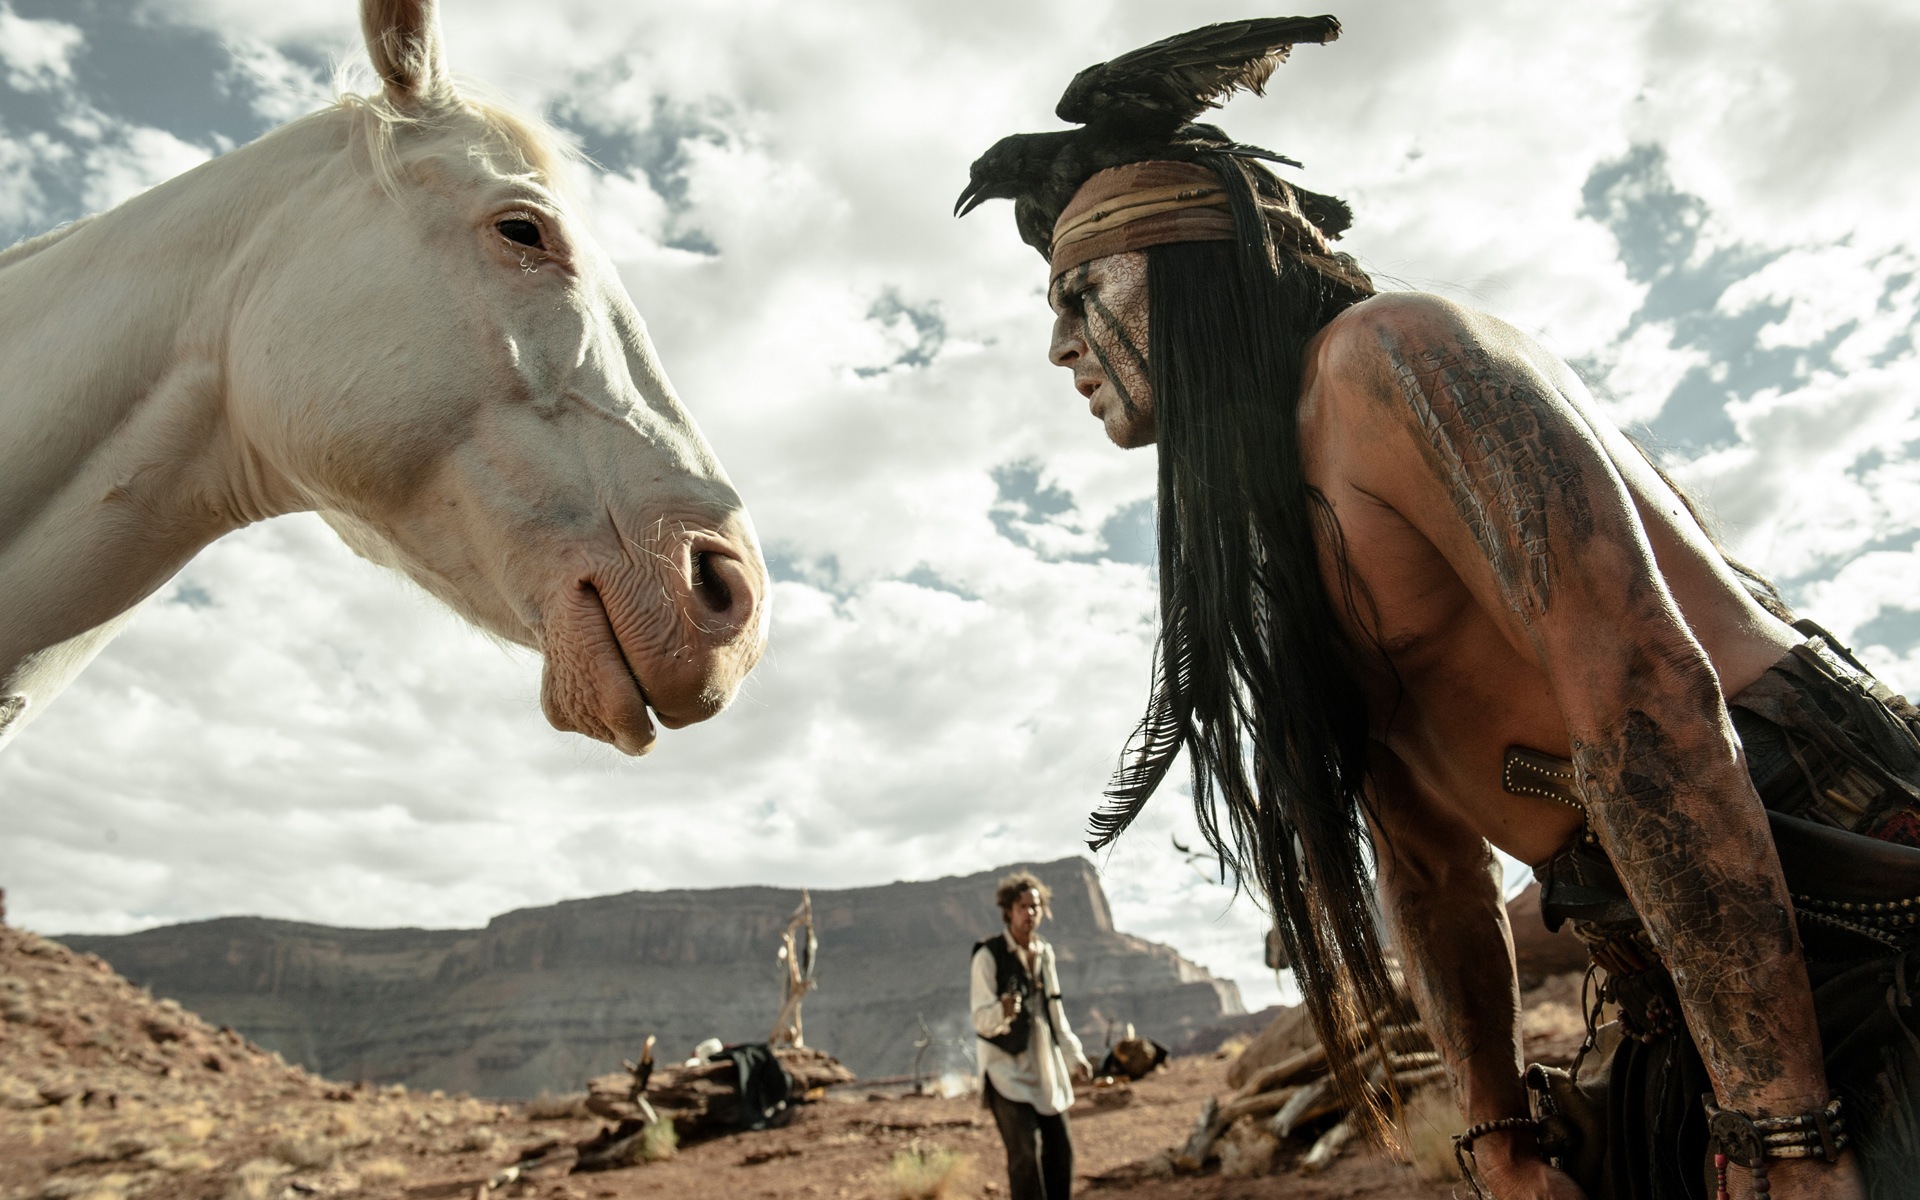 The Lone Ranger HD movie wallpapers #19 - 1920x1200